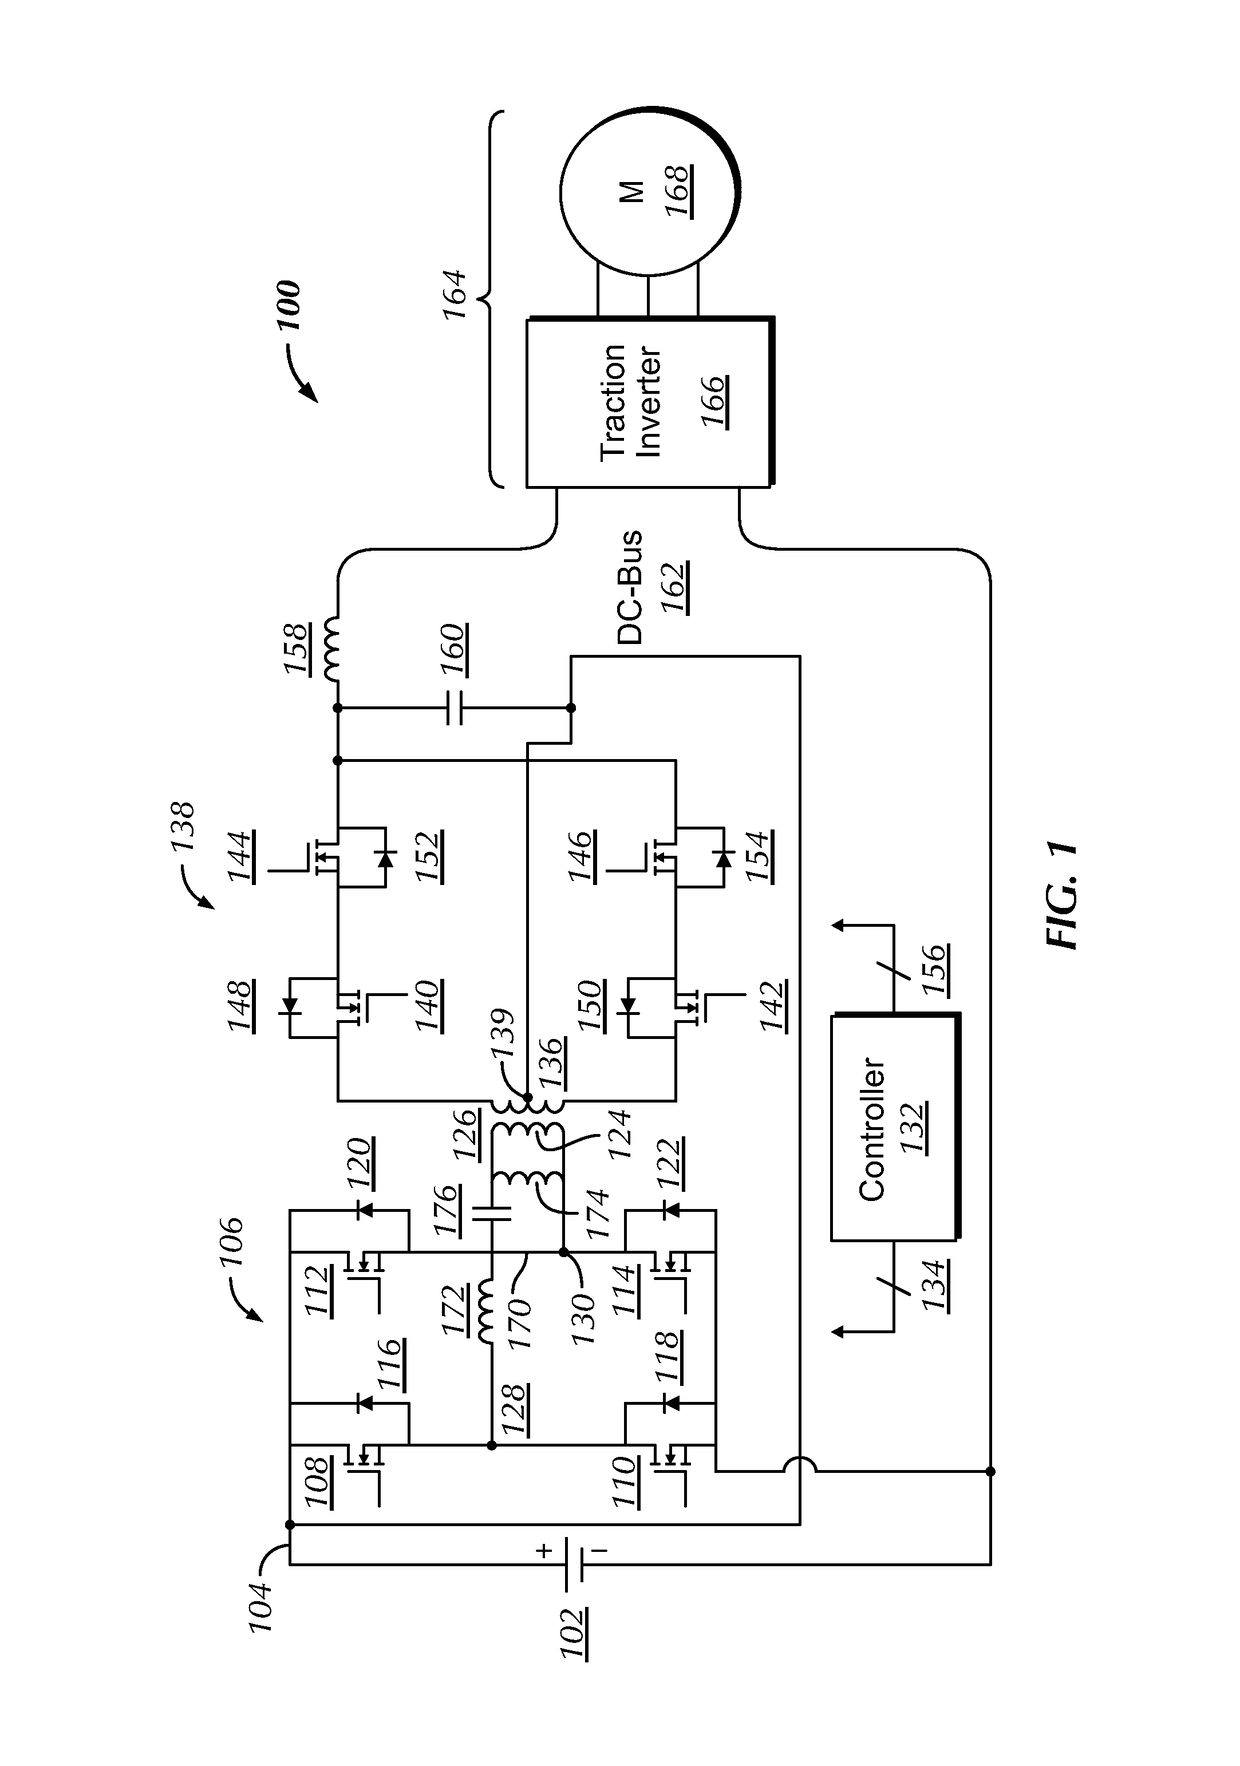 System and method for a DC/DC converter